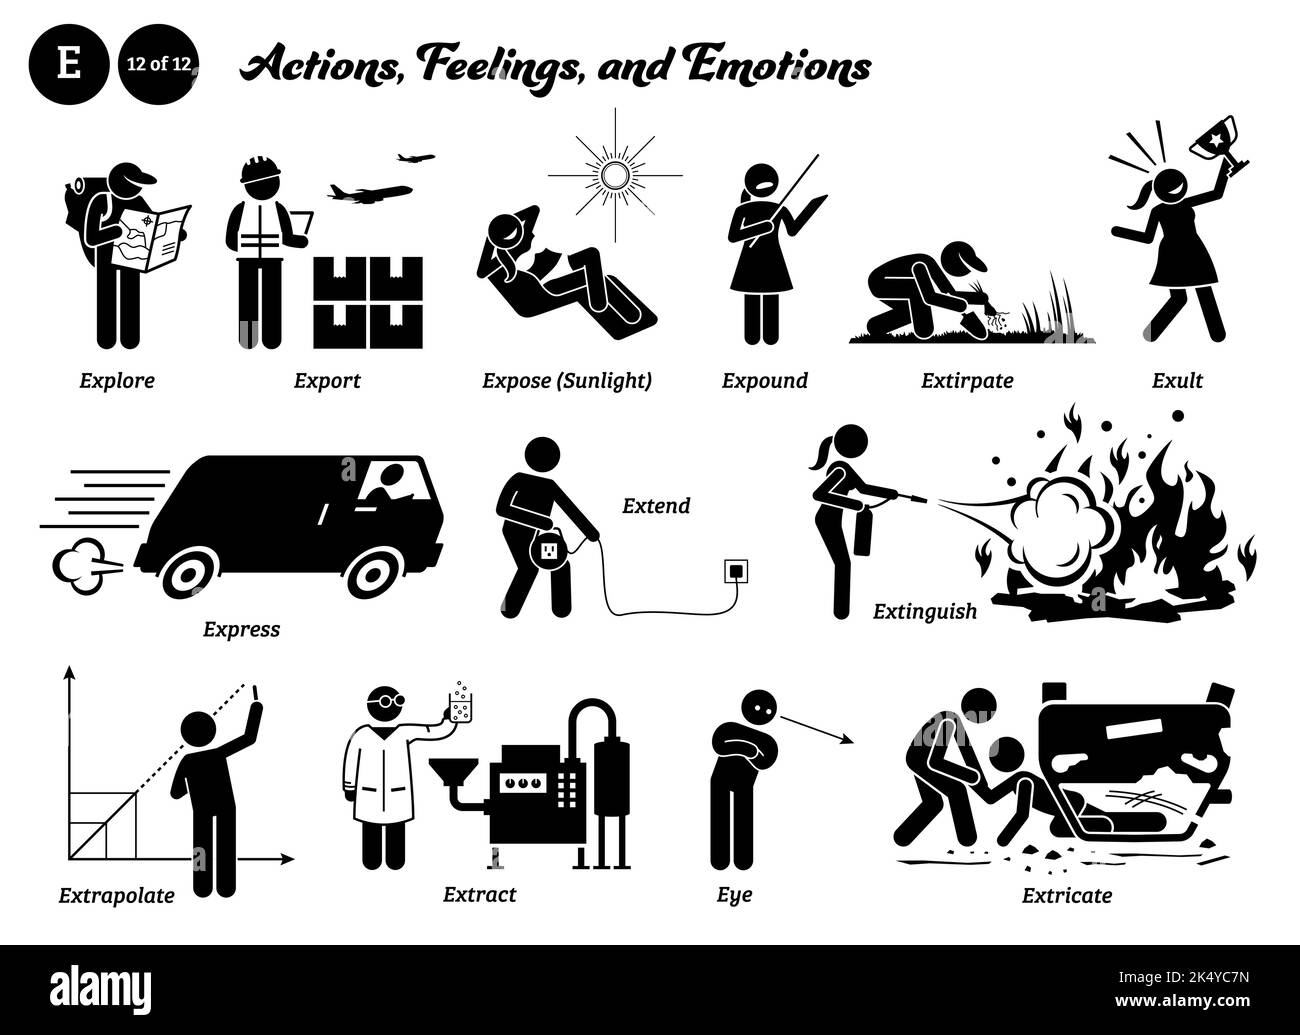 Stick figure human people man action, feelings, and emotions icons alphabet E. Explore, export, expose, expound, extirpate, exult, express, extend, ex Stock Vector